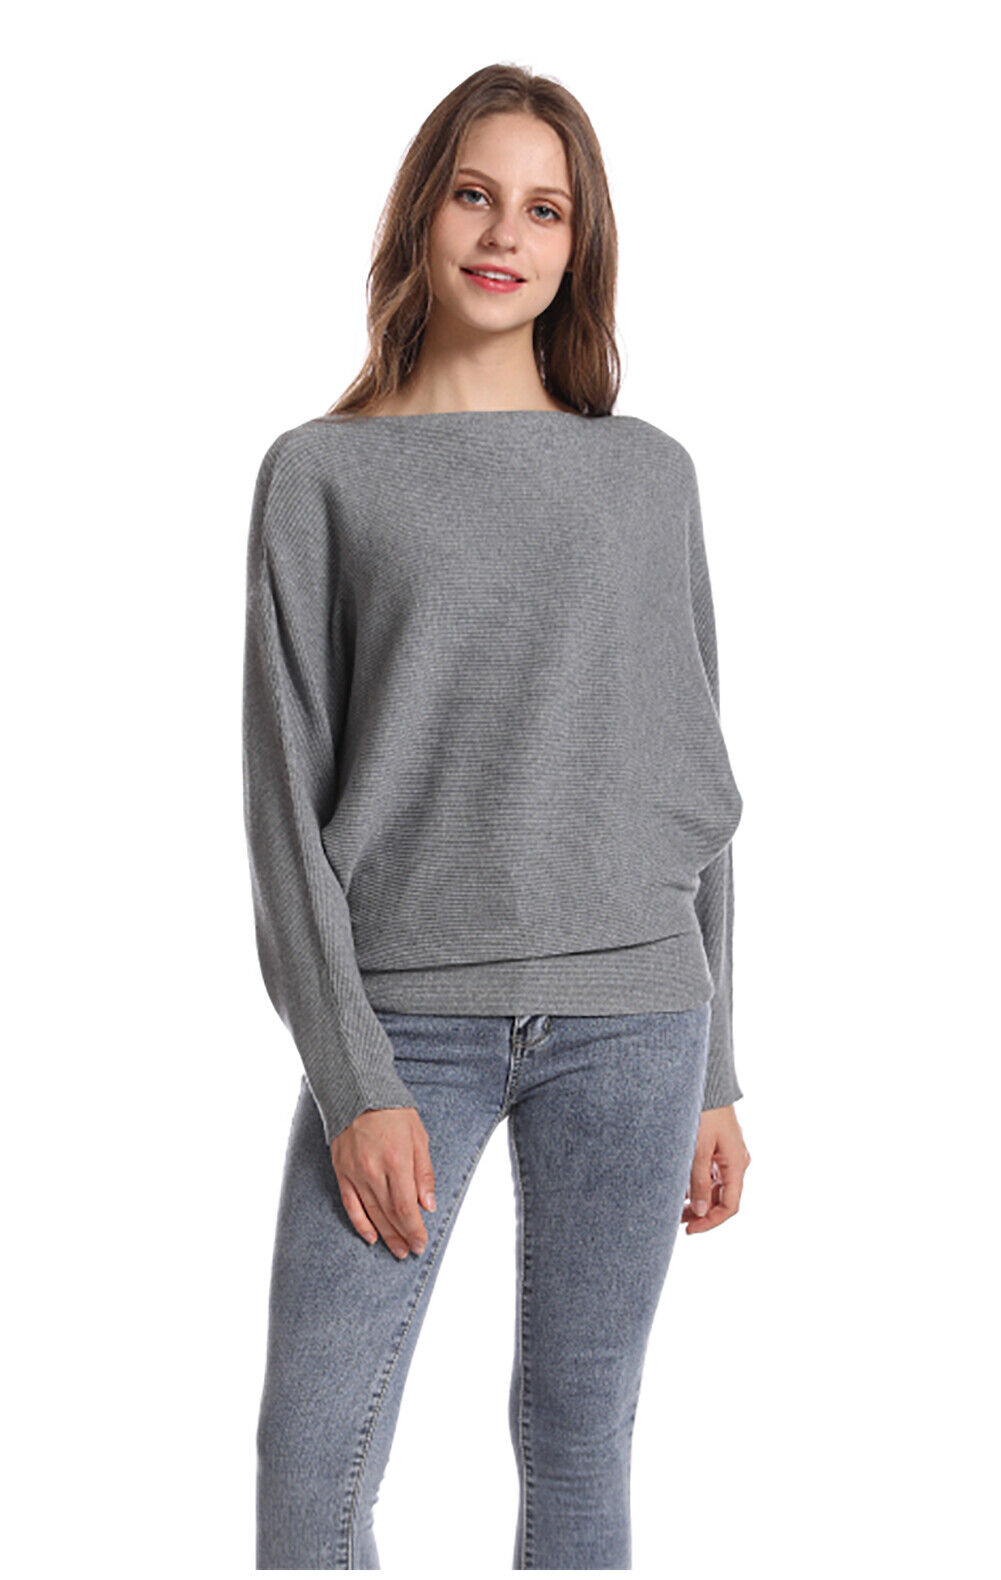 Styles I Love Women Soft Boat Neck Batwing Sleeve Knit Top Sweater, 12  Colors